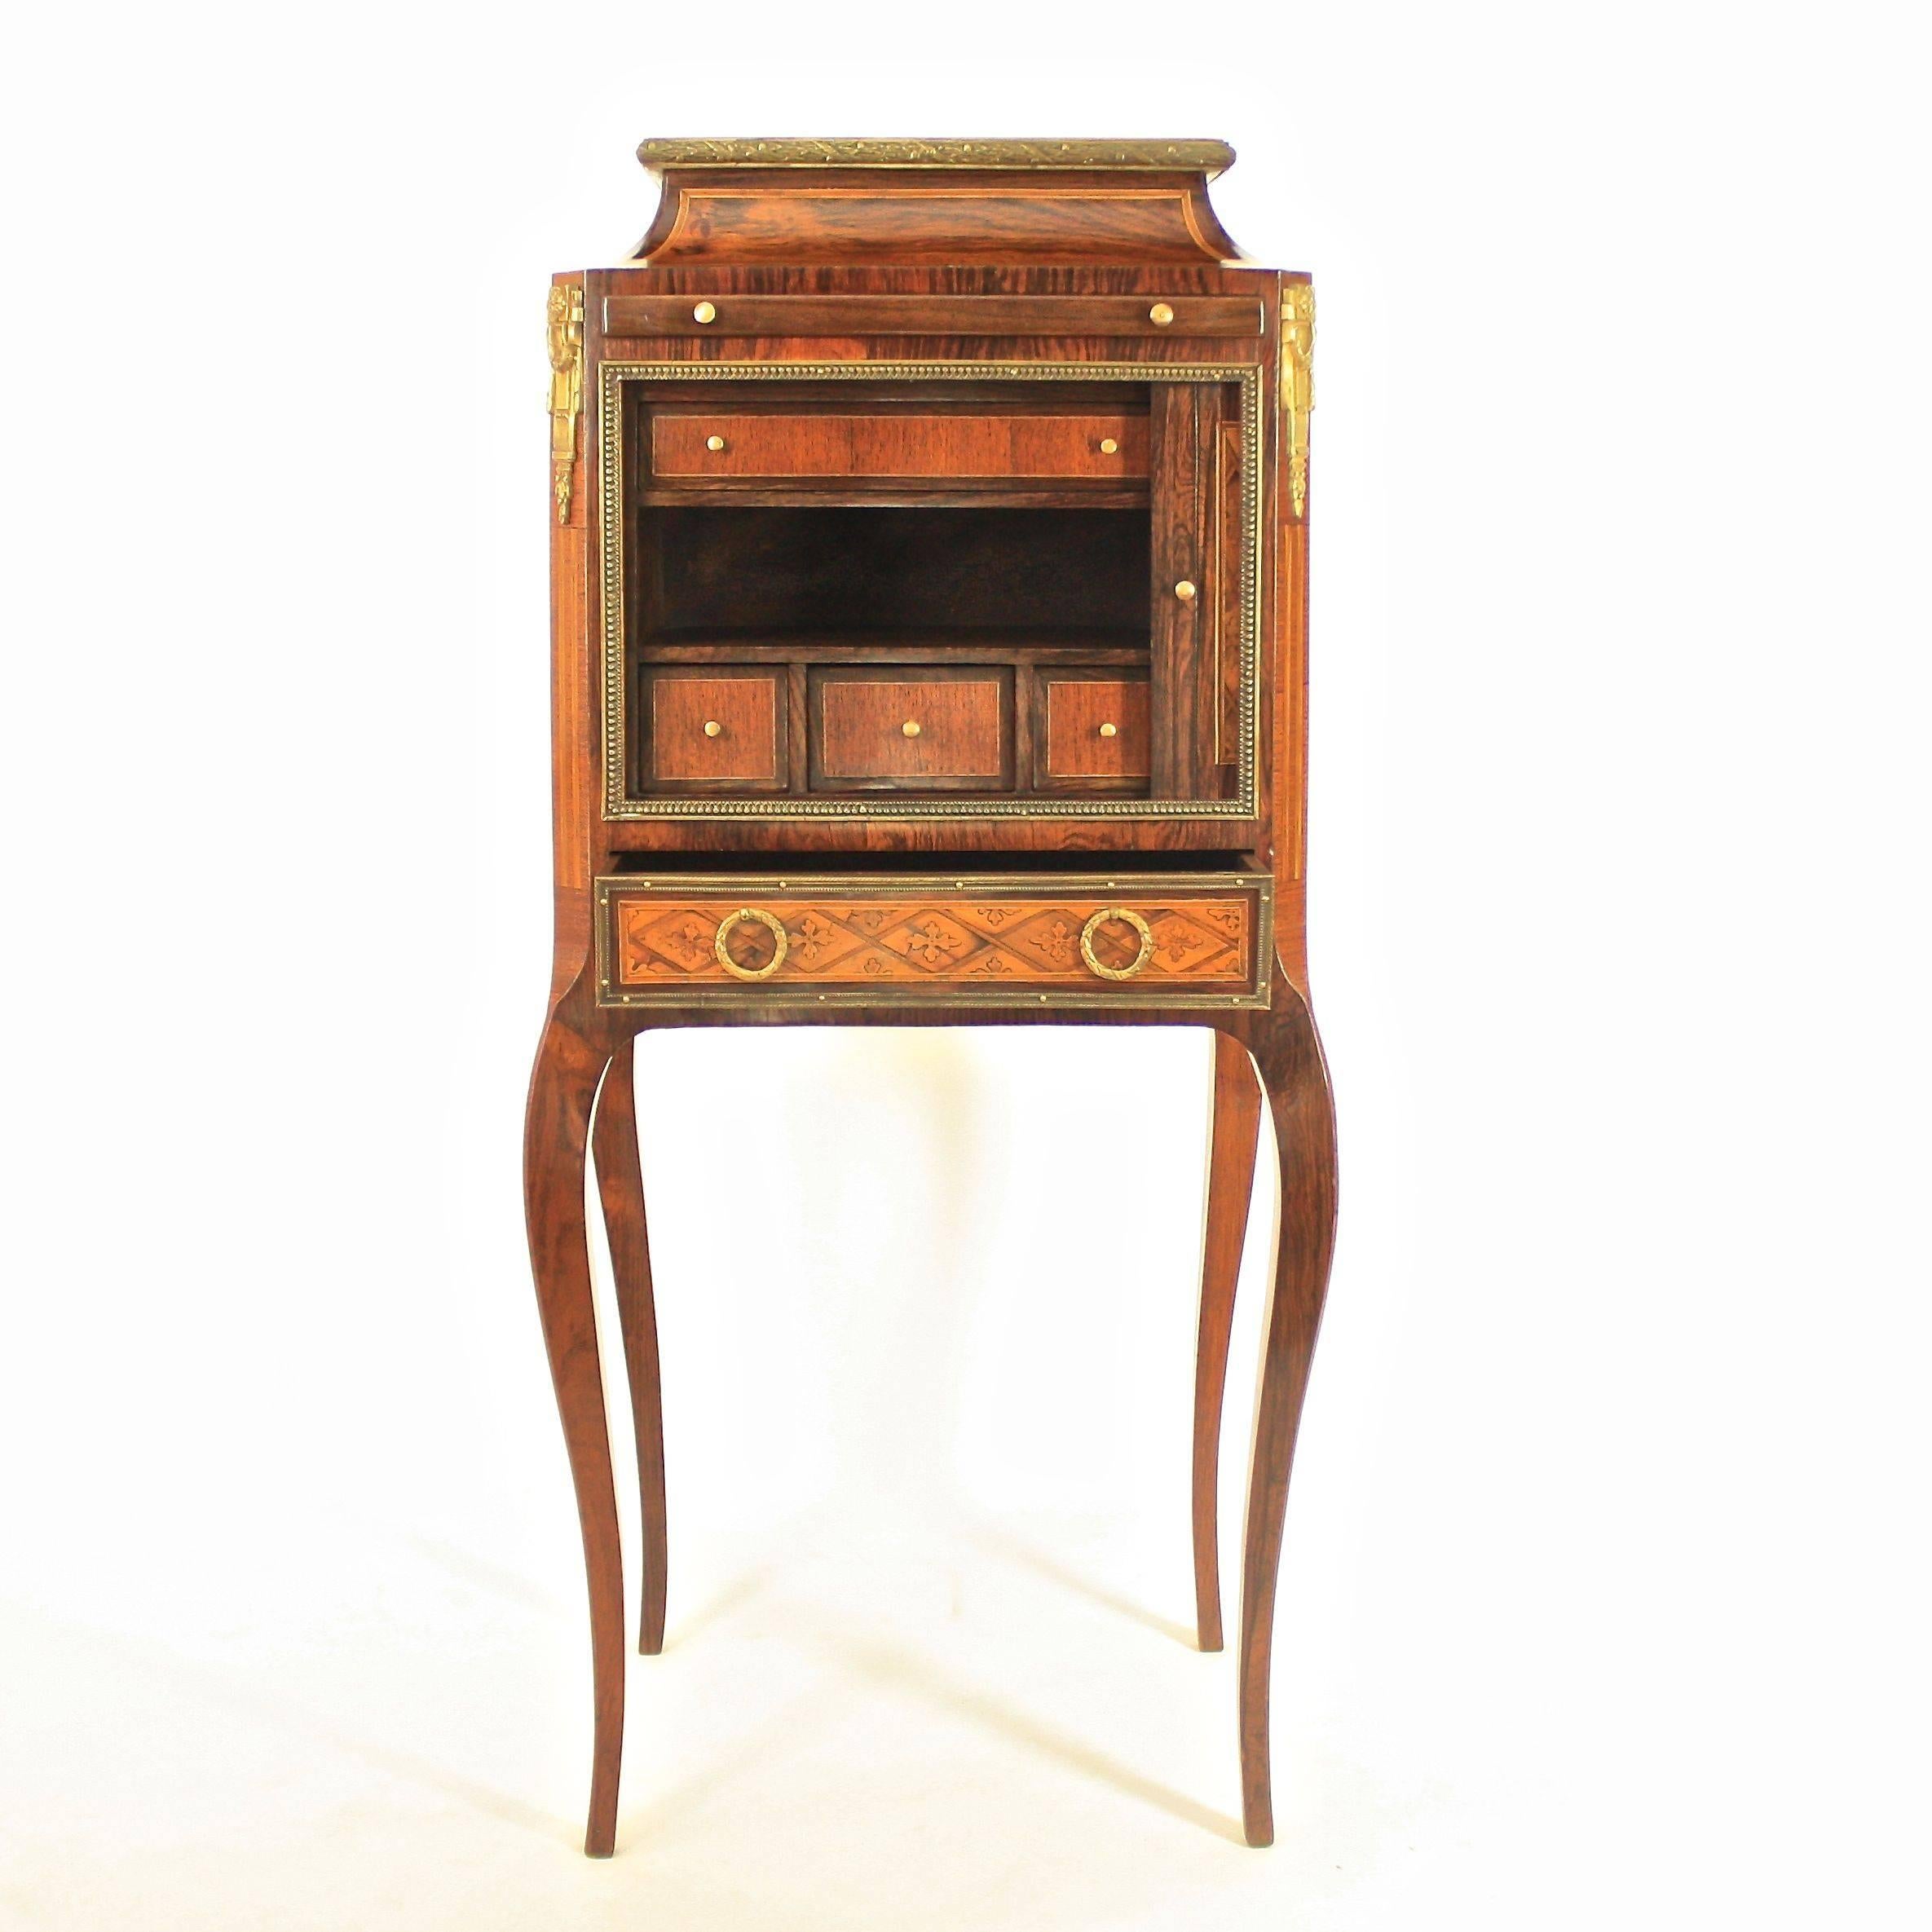 A small 19th century cabinet on Stand with a pagoda shaped top and a sliding door compartment containing three small drawers, one long drawer and a shelf, supported by four slender cabriole legs. The oak carcase veneered with 'marqueterie à la